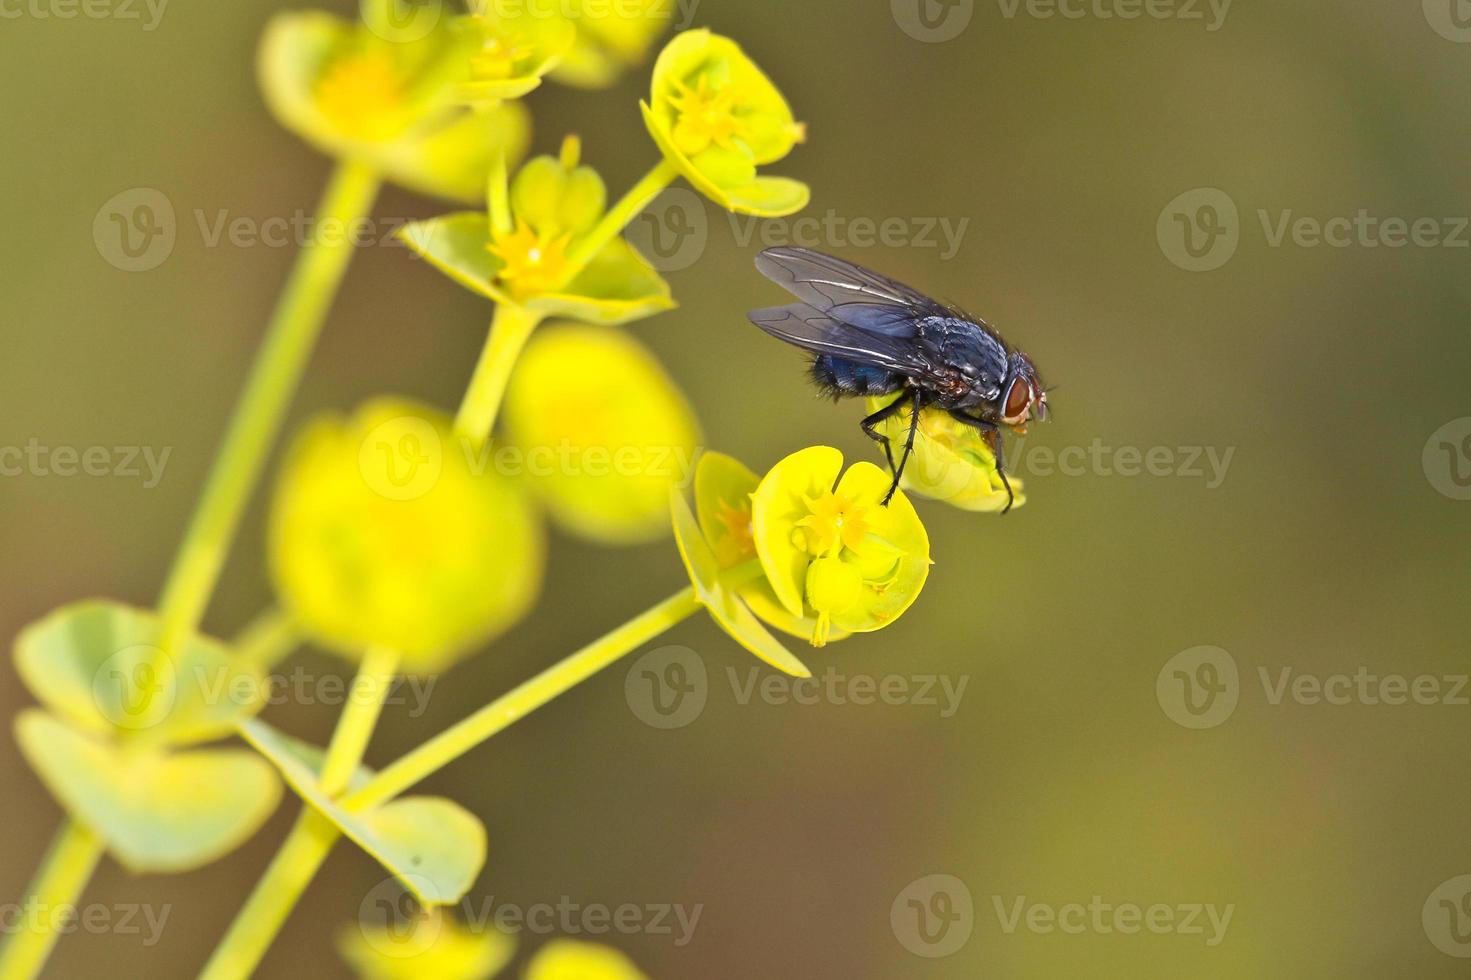 Fly on a green flower photo